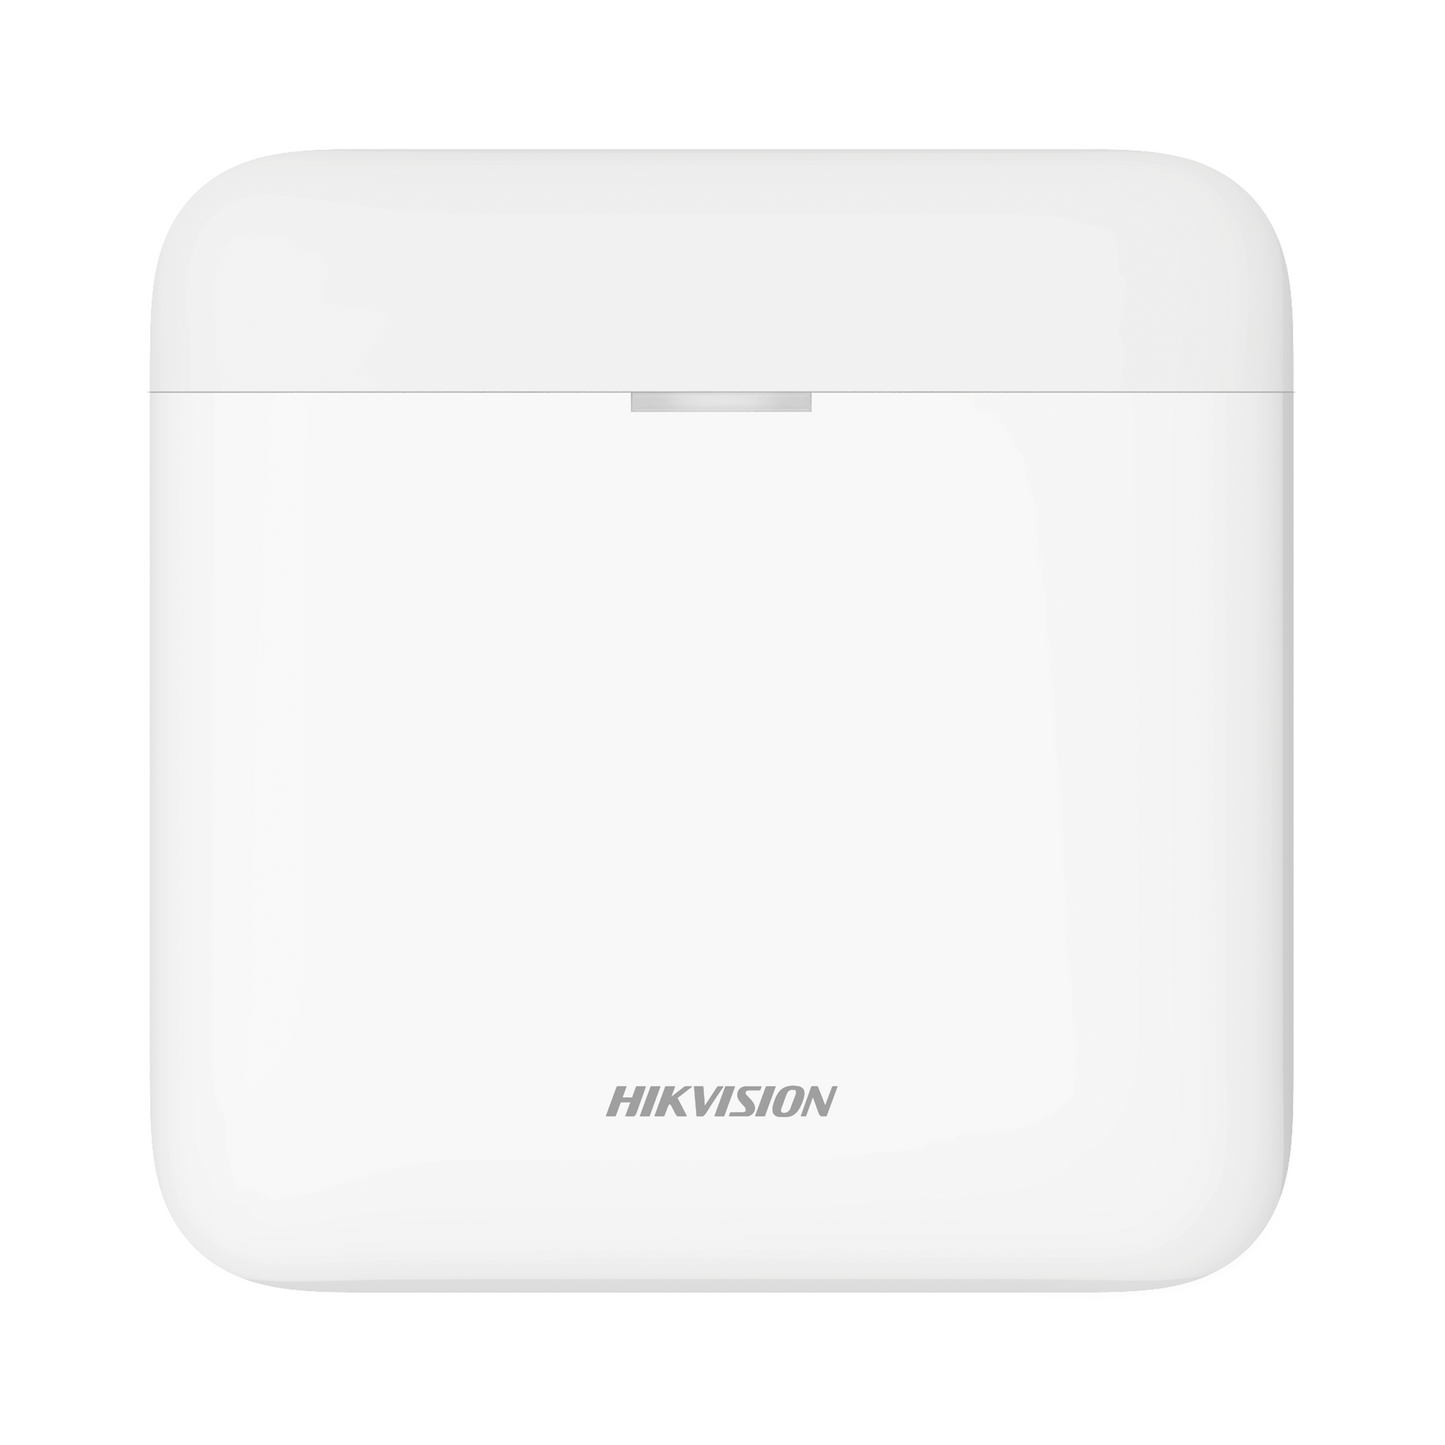 (AX PRO) Hikvision Signal Repeater